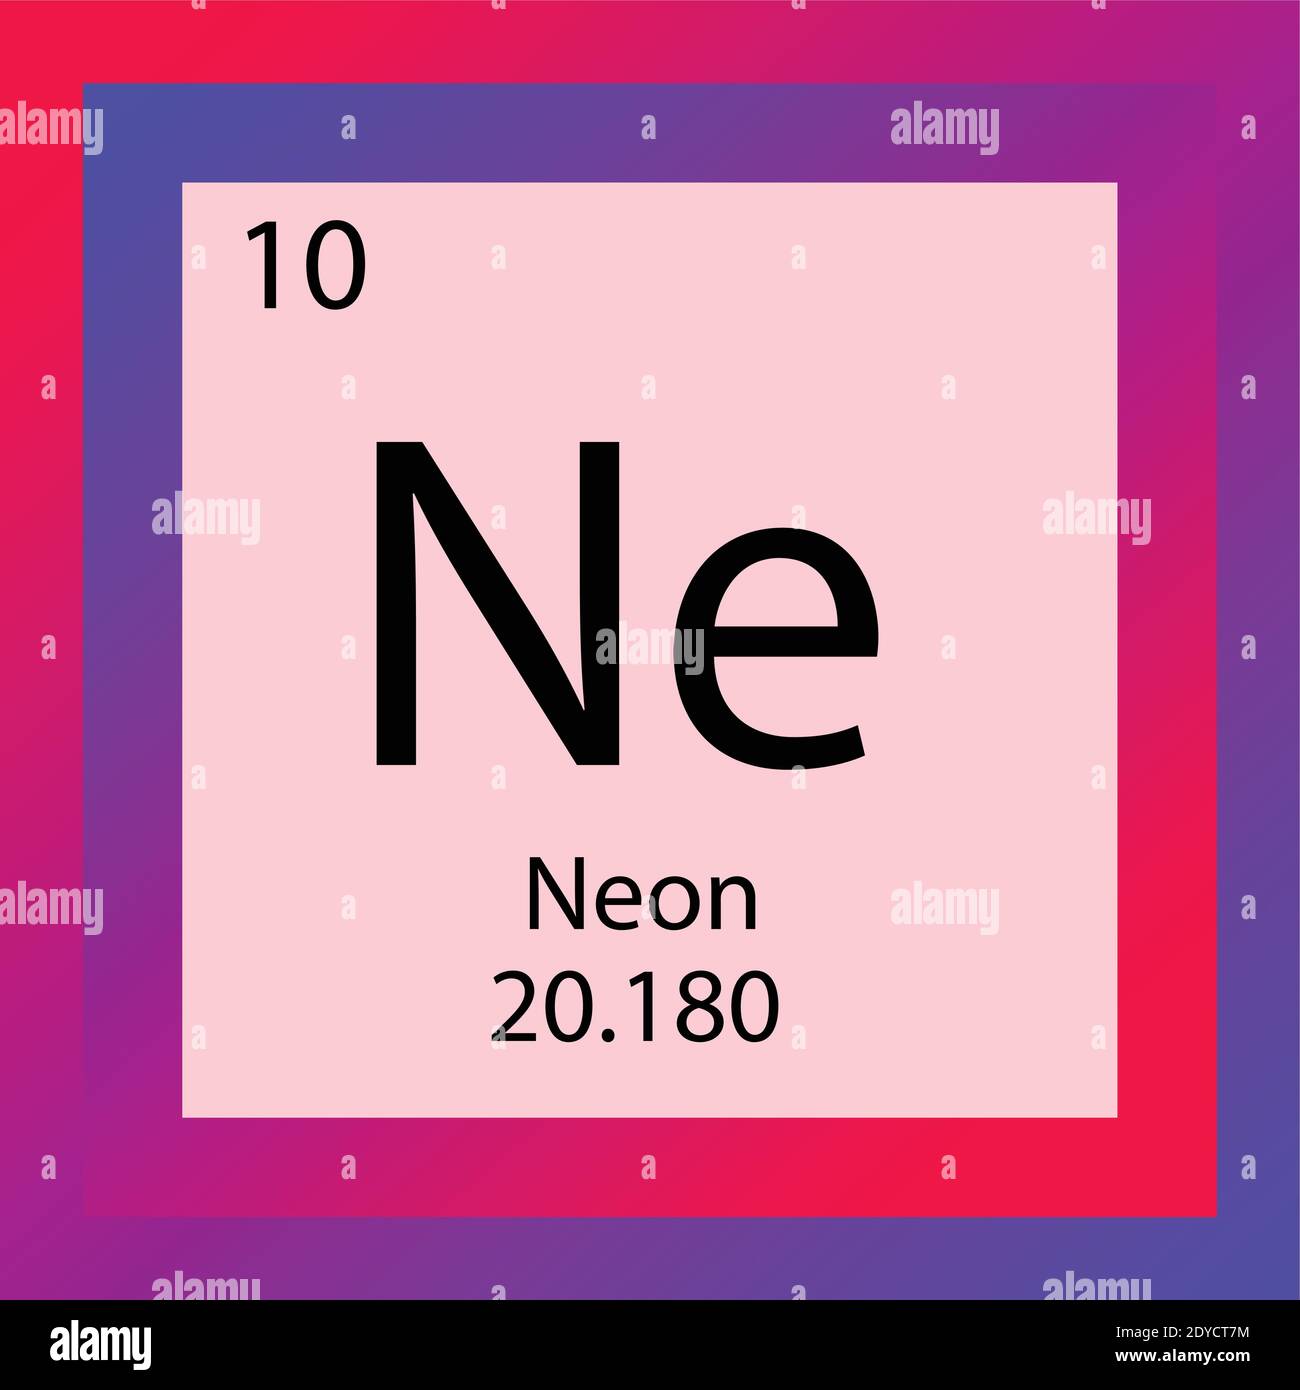 Ne Neon Chemical Element Periodic Table. Single element vector illustration, Noble gases element icon with molar mass and atomic number. Stock Vector